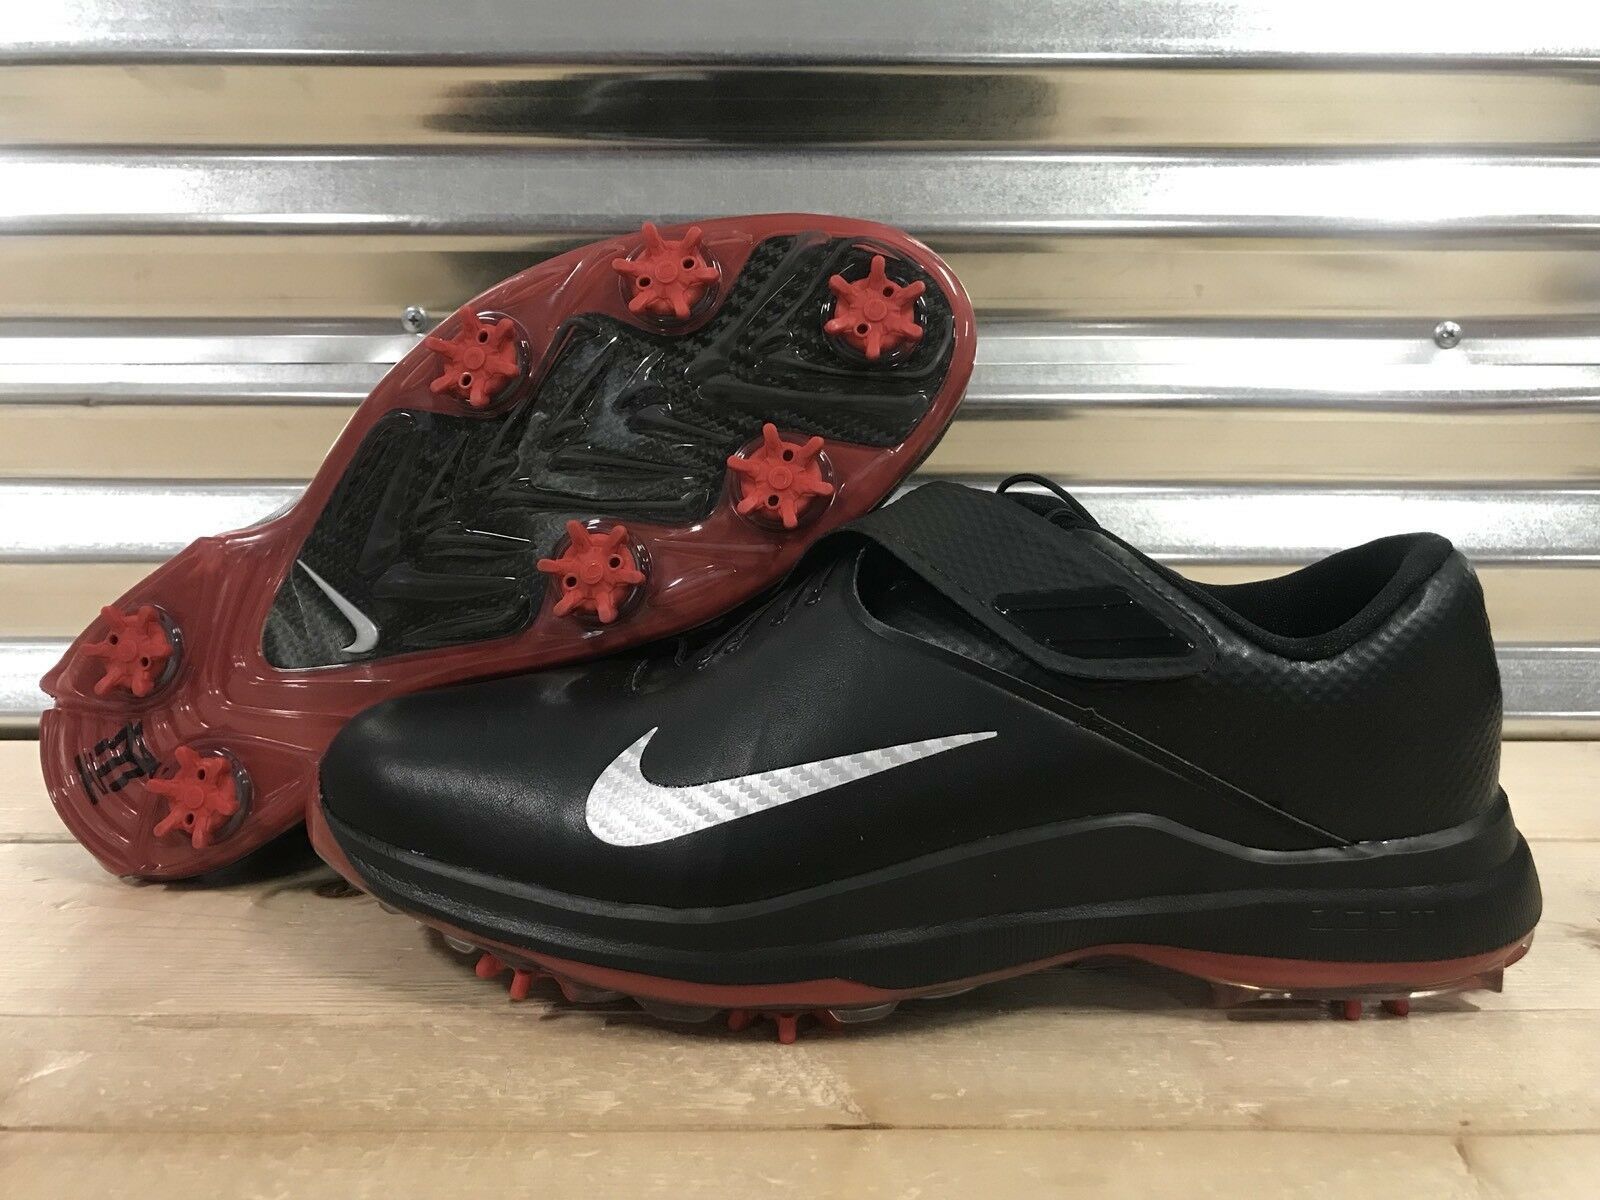 Nike Tiger Woods golf shoes cleats